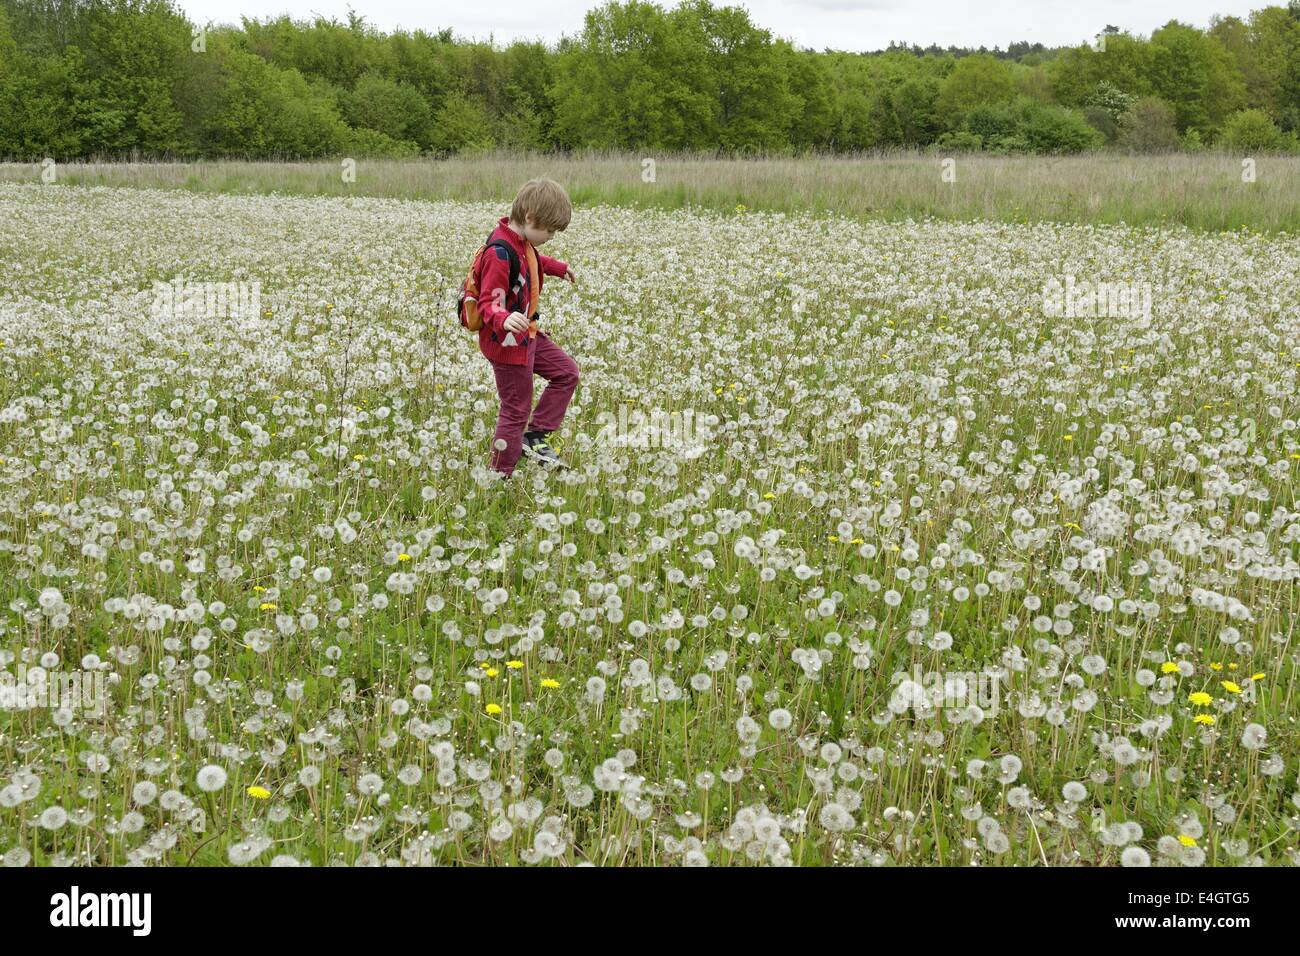 young boy in a meadow full of dandelion clocks Stock Photo